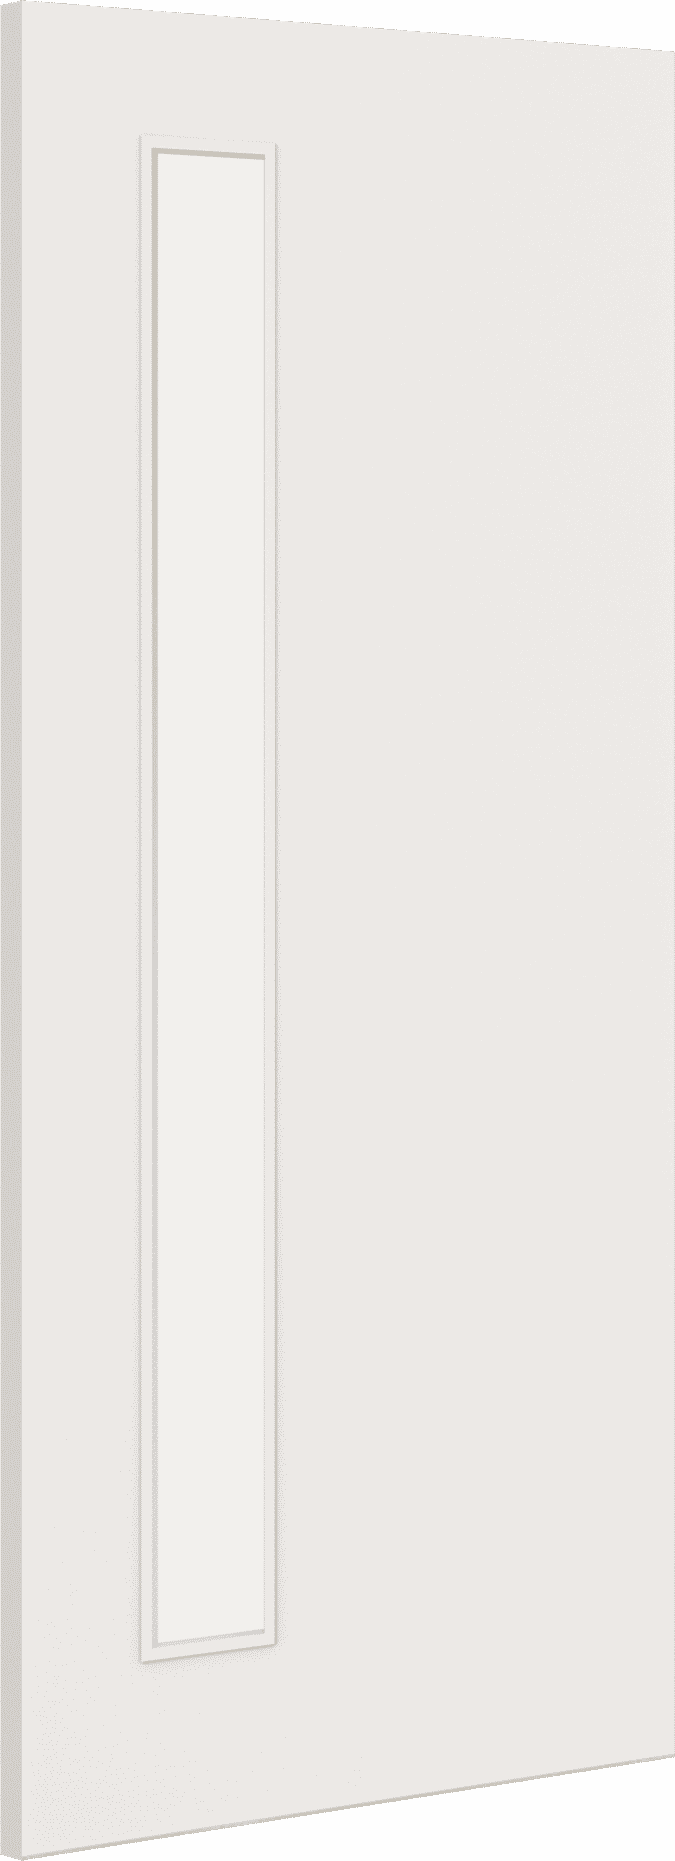 1981mm x 762mm x 44mm (30") Architectural Paint Grade White 06 Clear Glazed Fire Door Blank